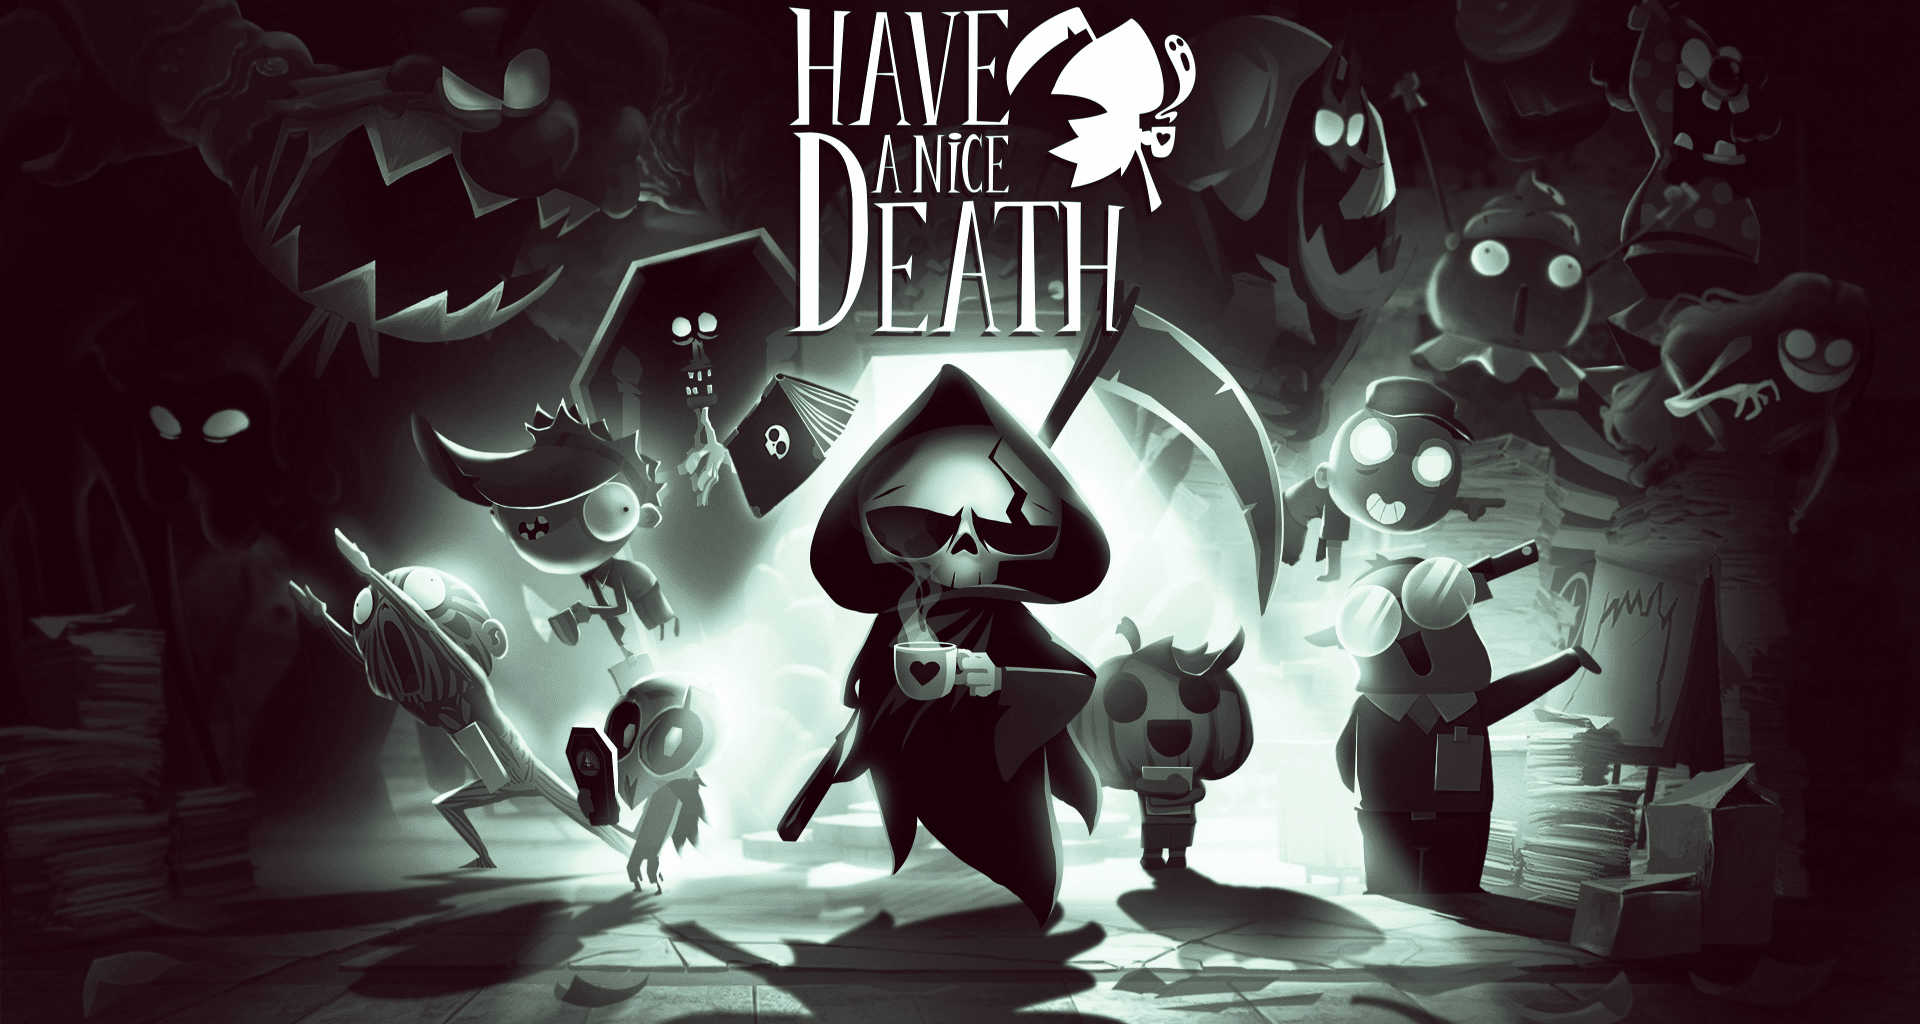 Have a Nice Death (PS5) Review - Dark Humor for All 34534